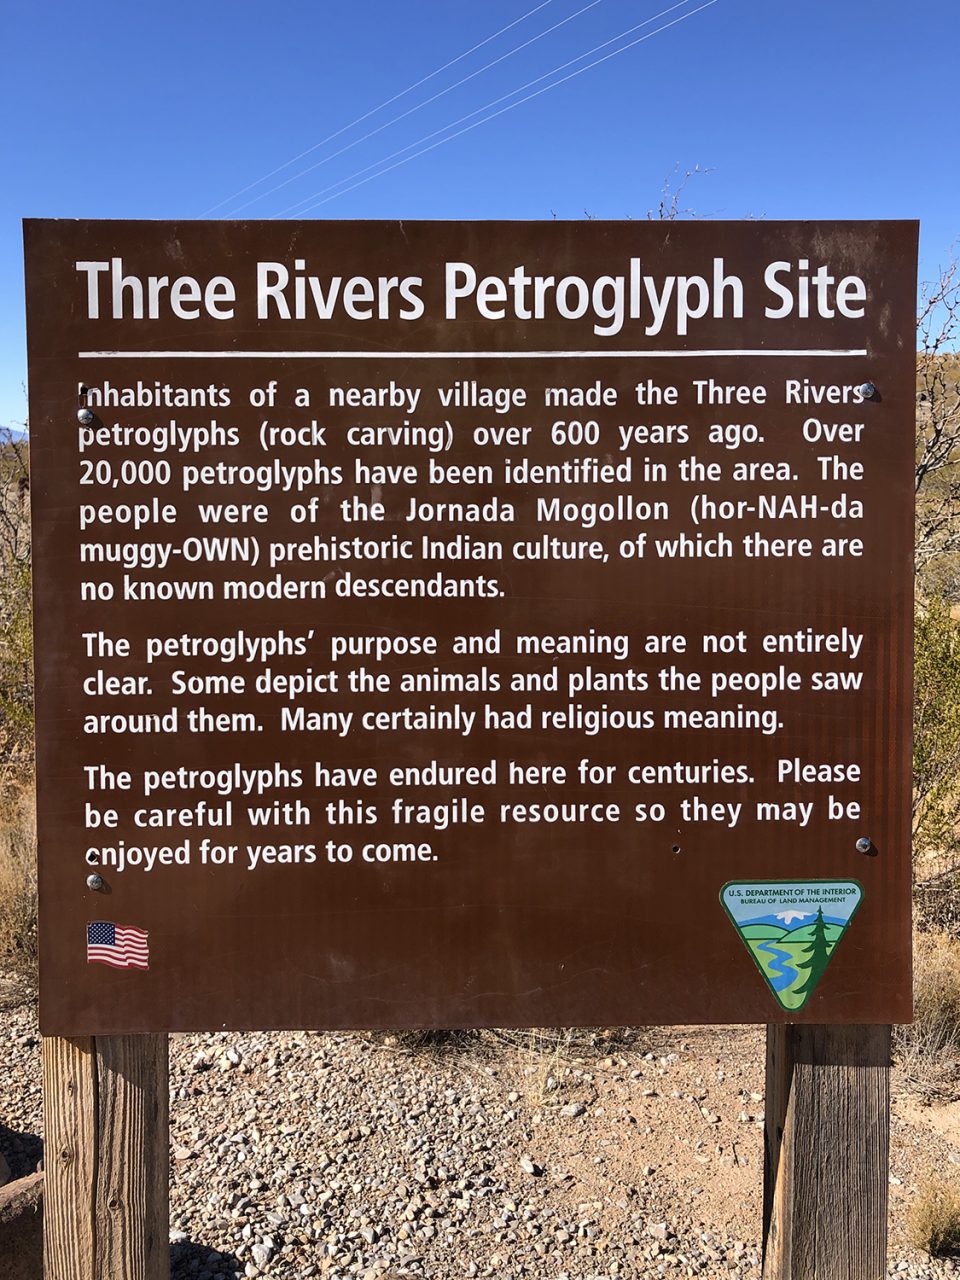 U.S. Department of the Interior sign at the Three Rivers Petroglyph Site in New Mexico. Photograph by Keith Dotson. Copyright 2022.